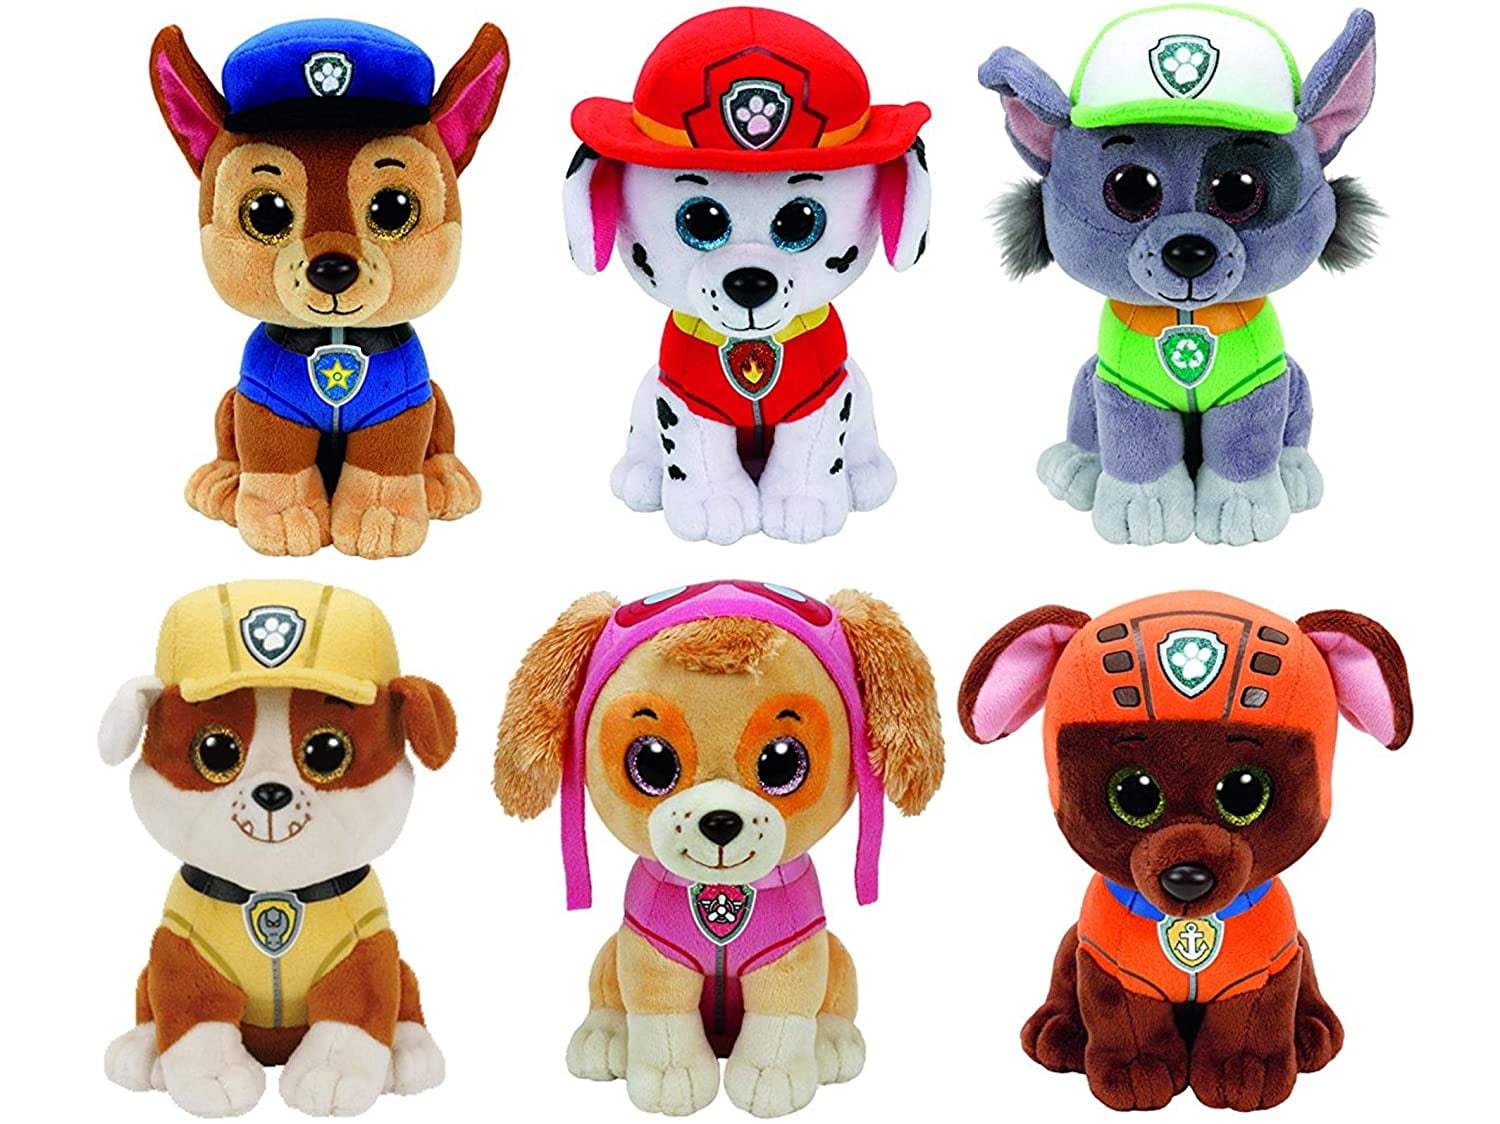 Chase With Glitter Eyes 15 Cm for sale online Ty 41208 Paw Patrol 